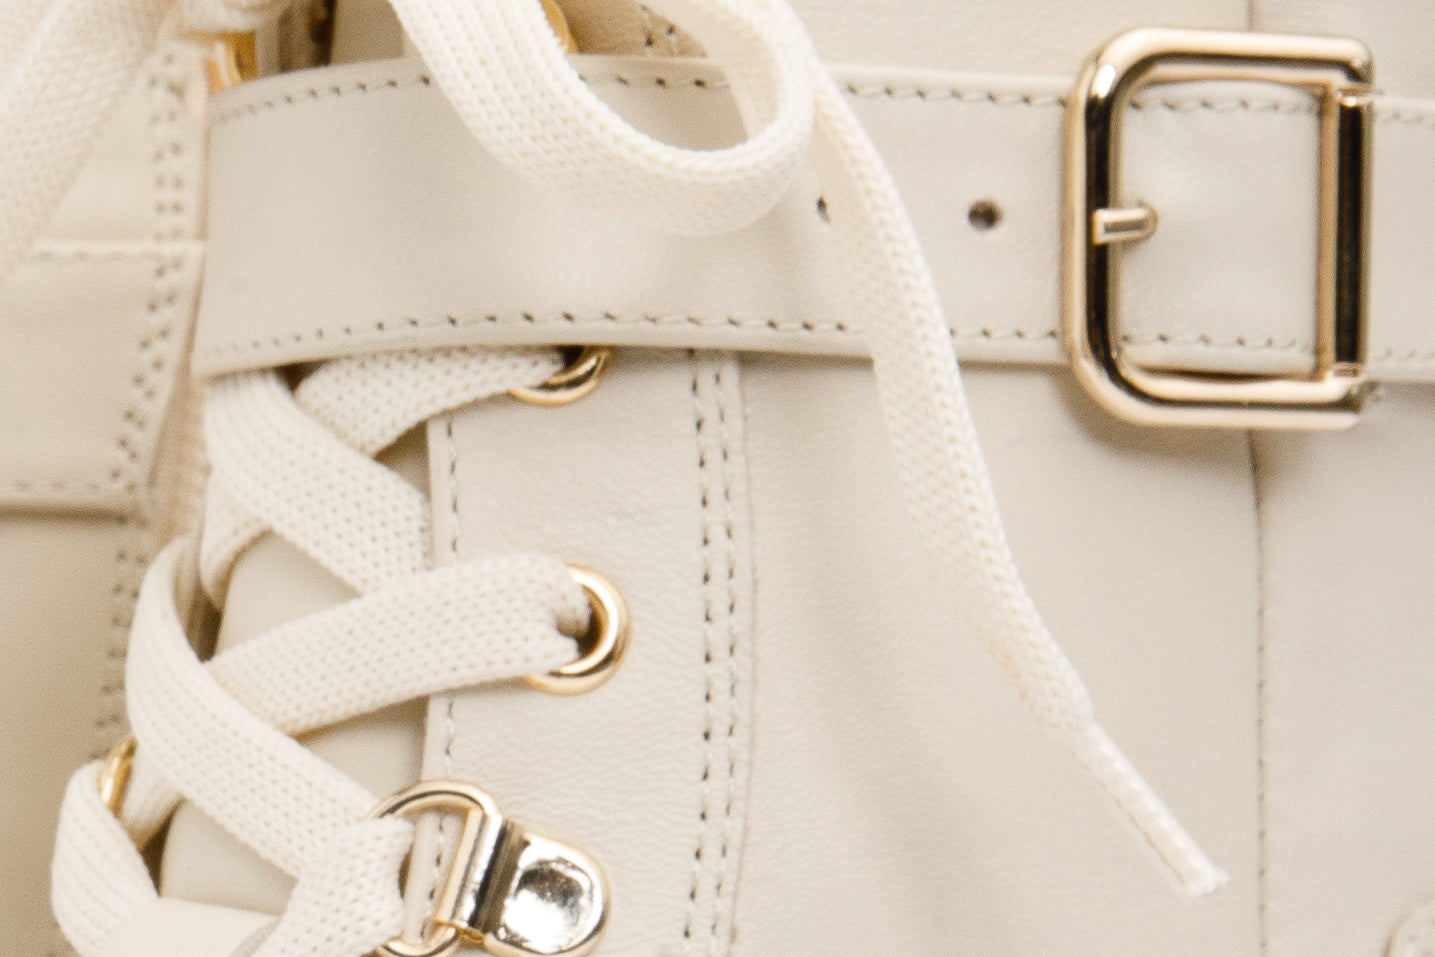 The Belgrano Cream Leather Lace-Up Ankle Women Boot With a Side Zipper